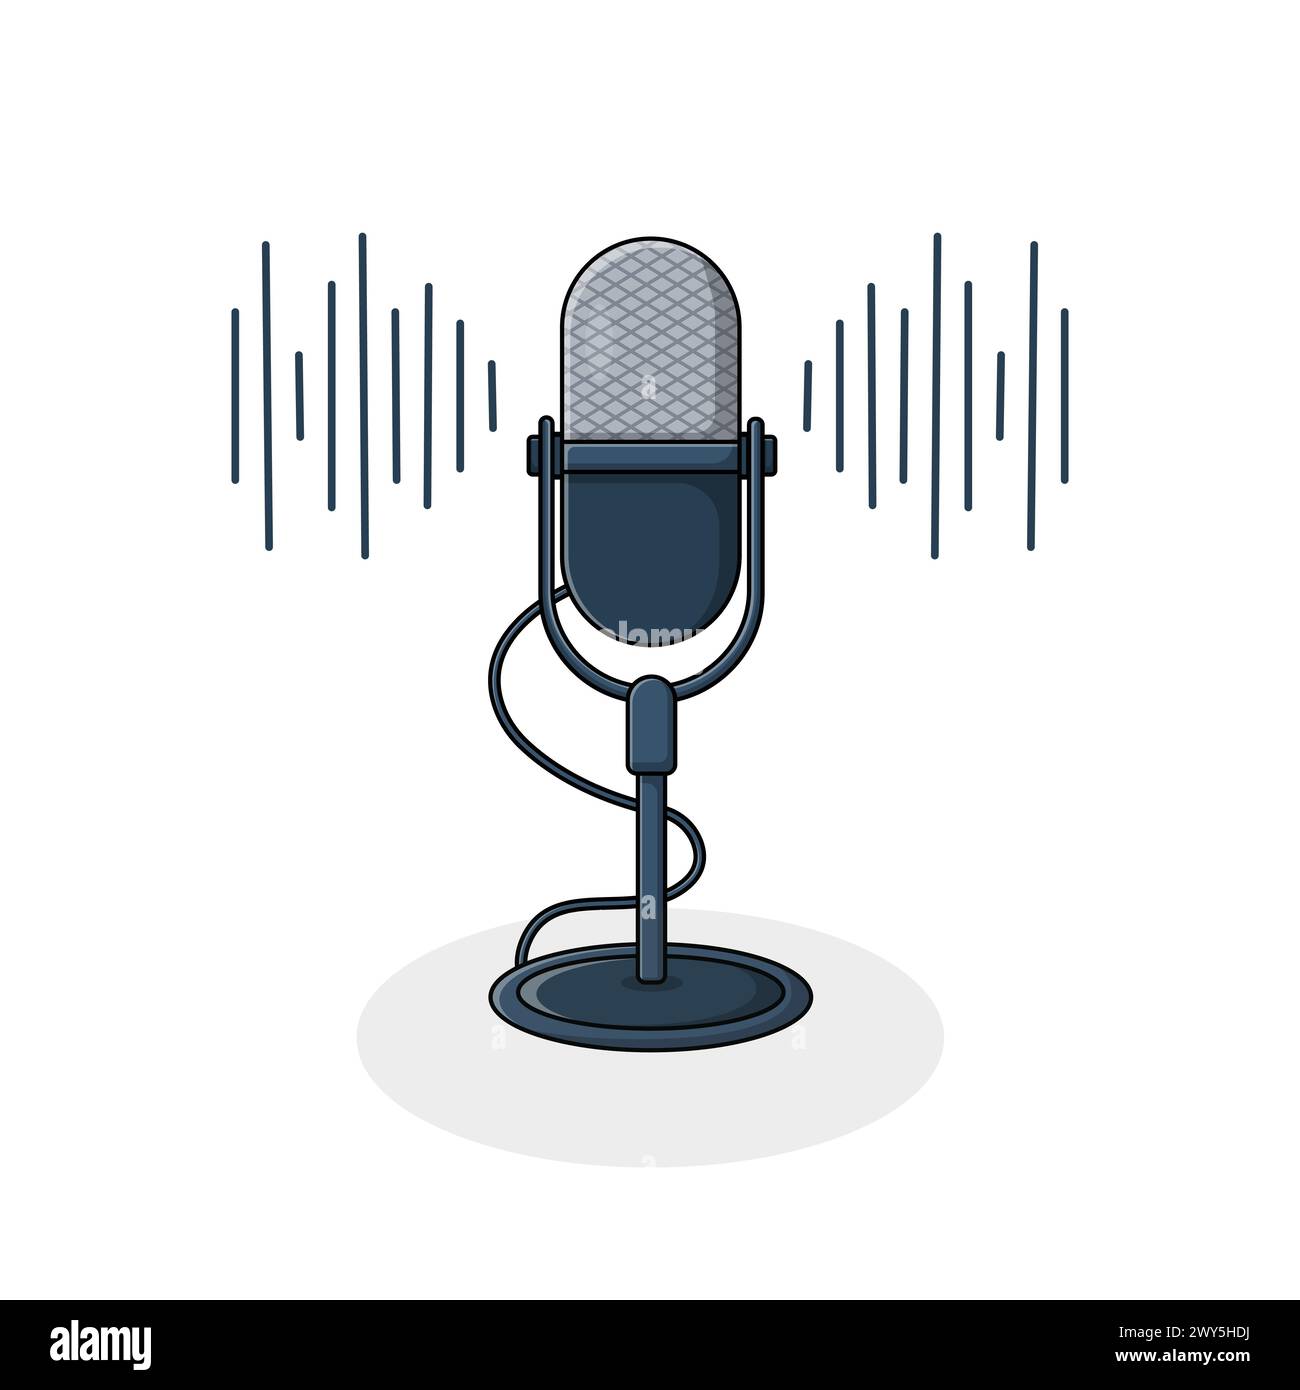 Detailed Podcast Microphone Vector Illustration. Sound Recording Equipment Concept Design Stock Vector